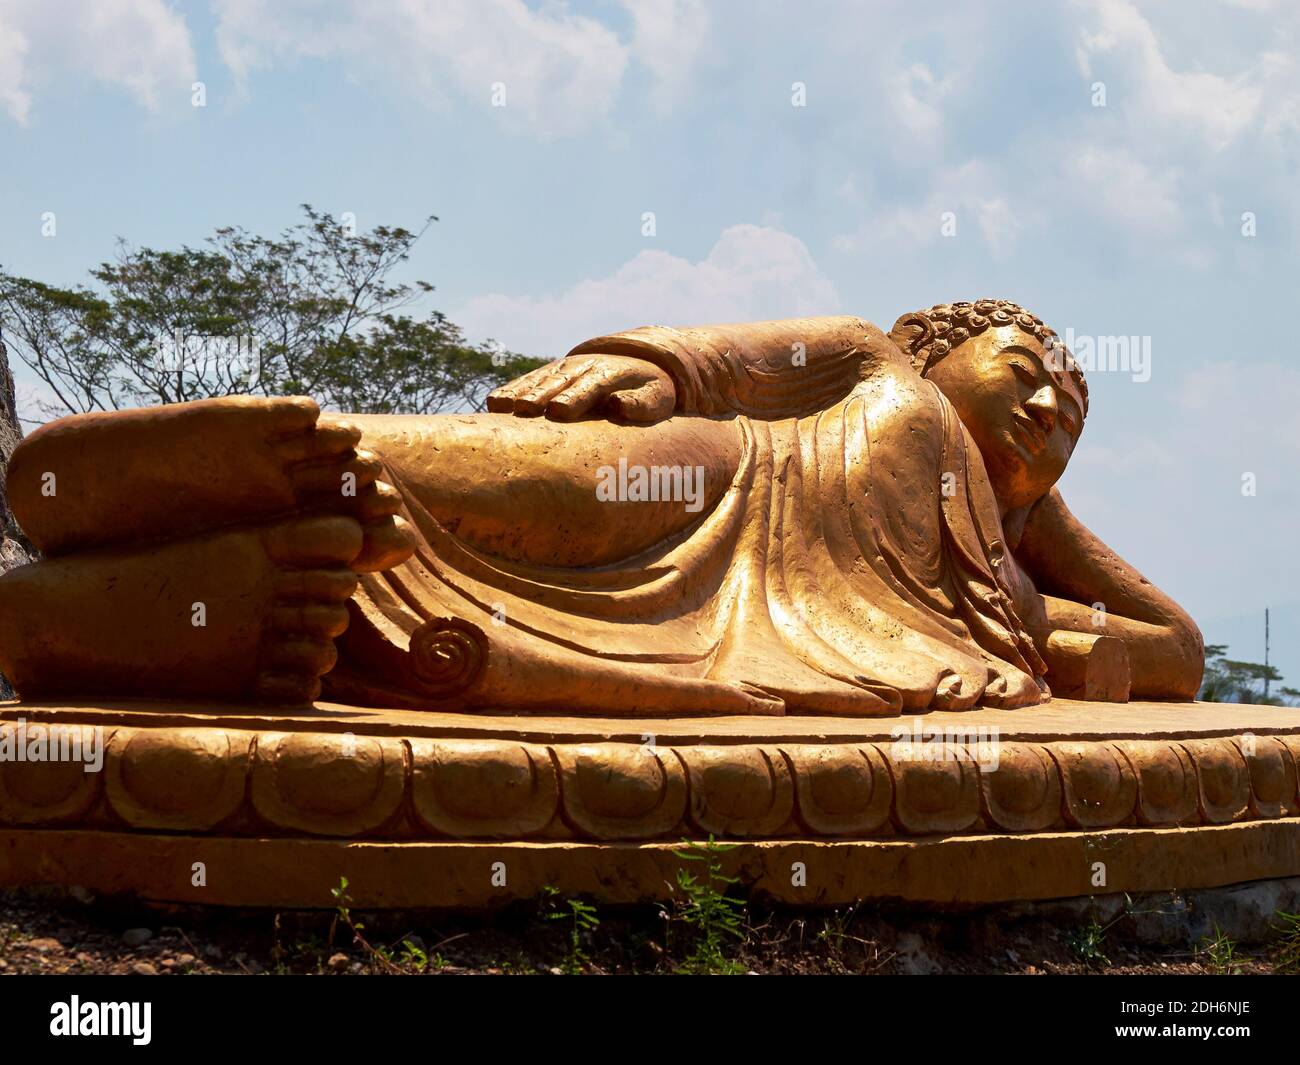 Central Java, Indonesia - August 26, 2020 : A large sleeping buddha statue was taken from his feet Stock Photo